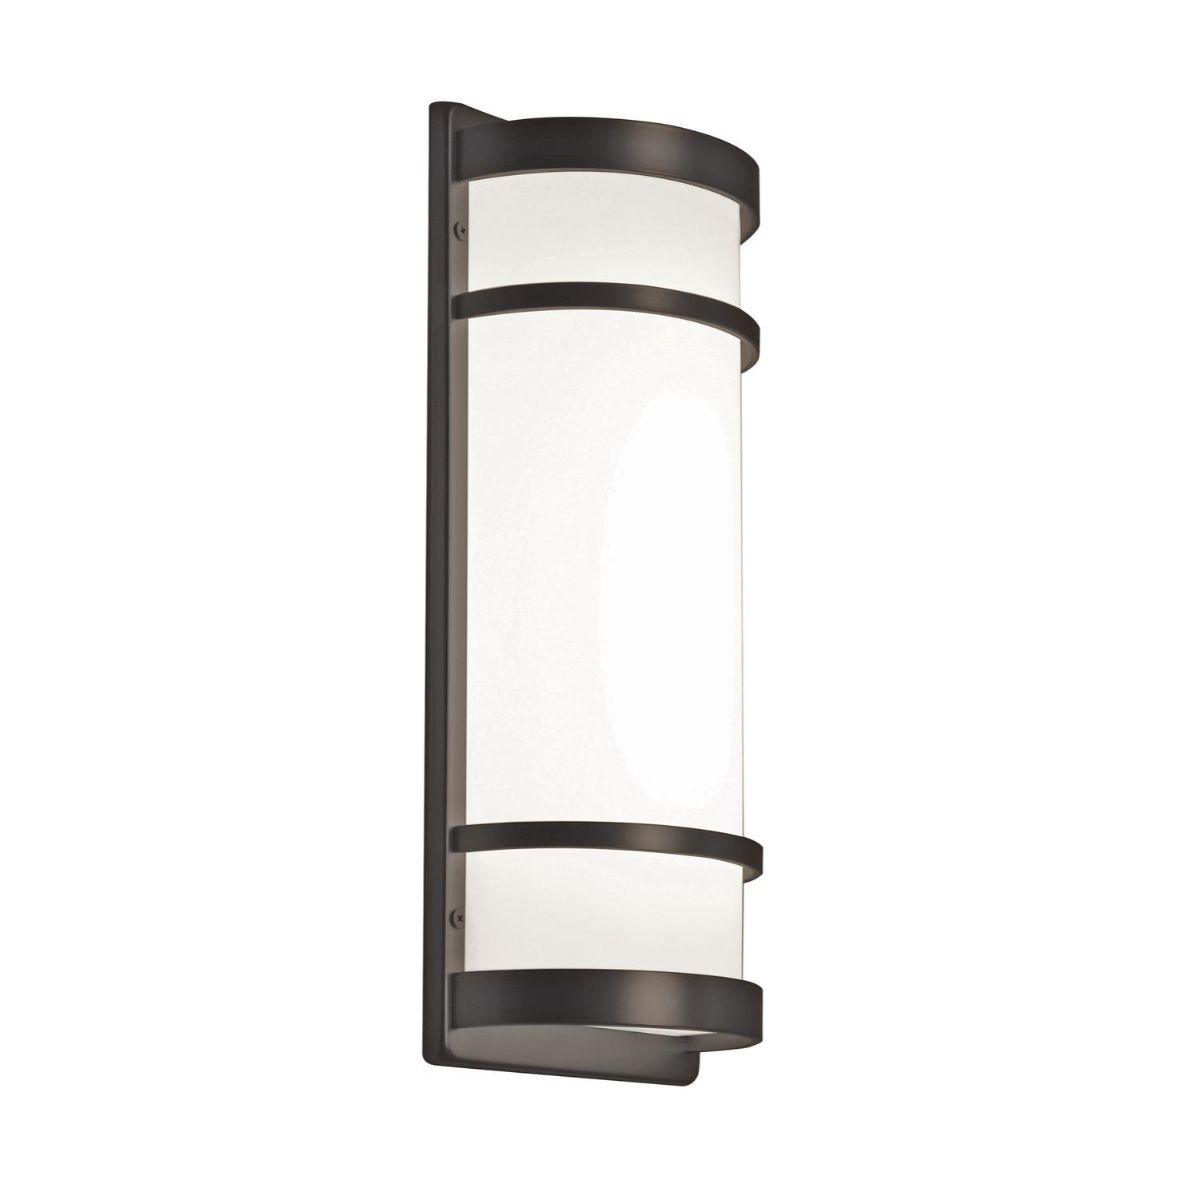 Brio 18 in. LED Wall Light